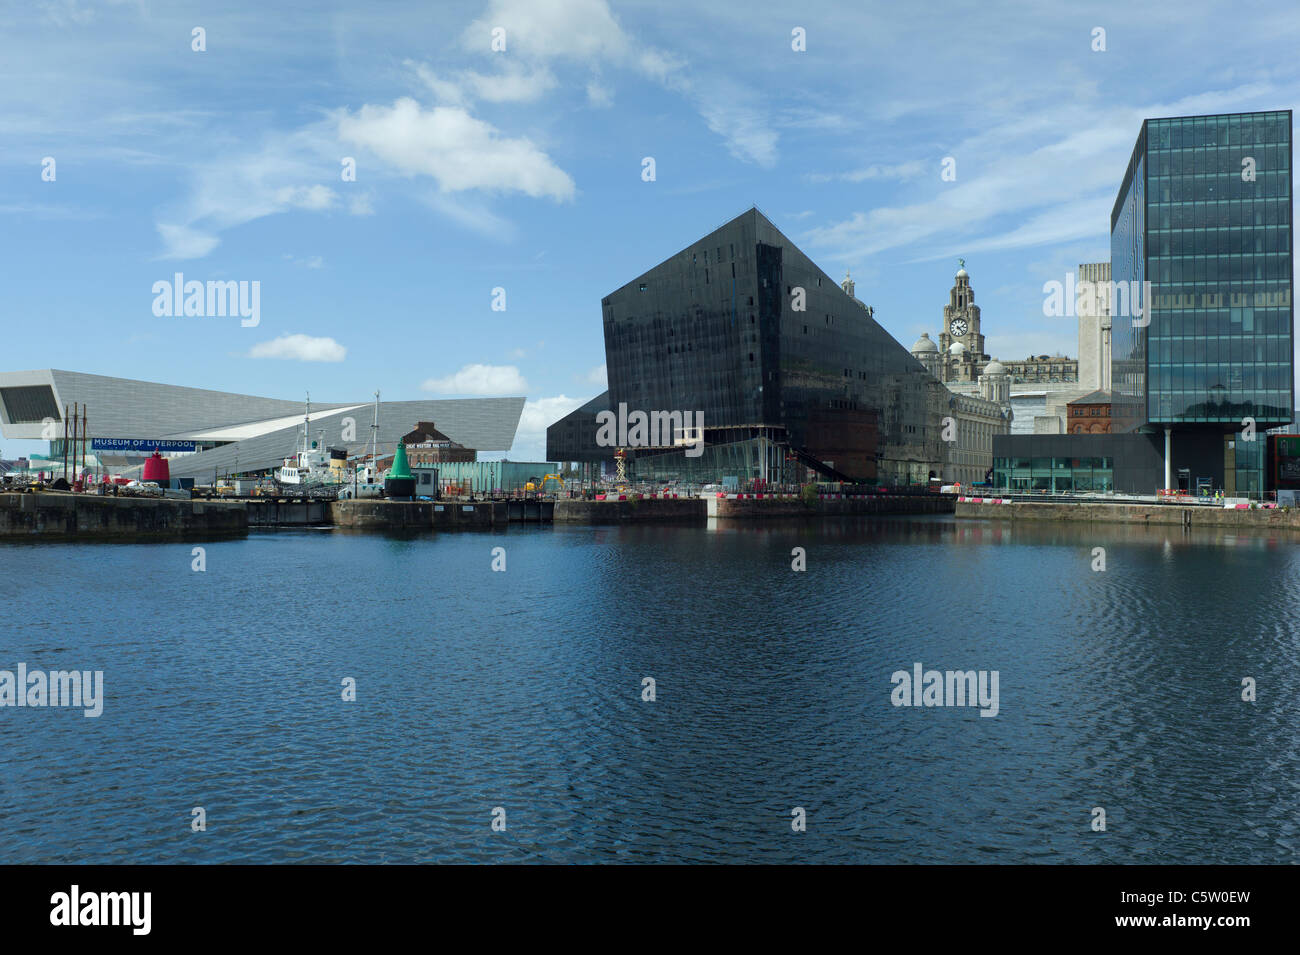 Mann Island Apartment building Museum of Liverpool & The Three Graces from Albert Dock Liverpool England Stock Photo